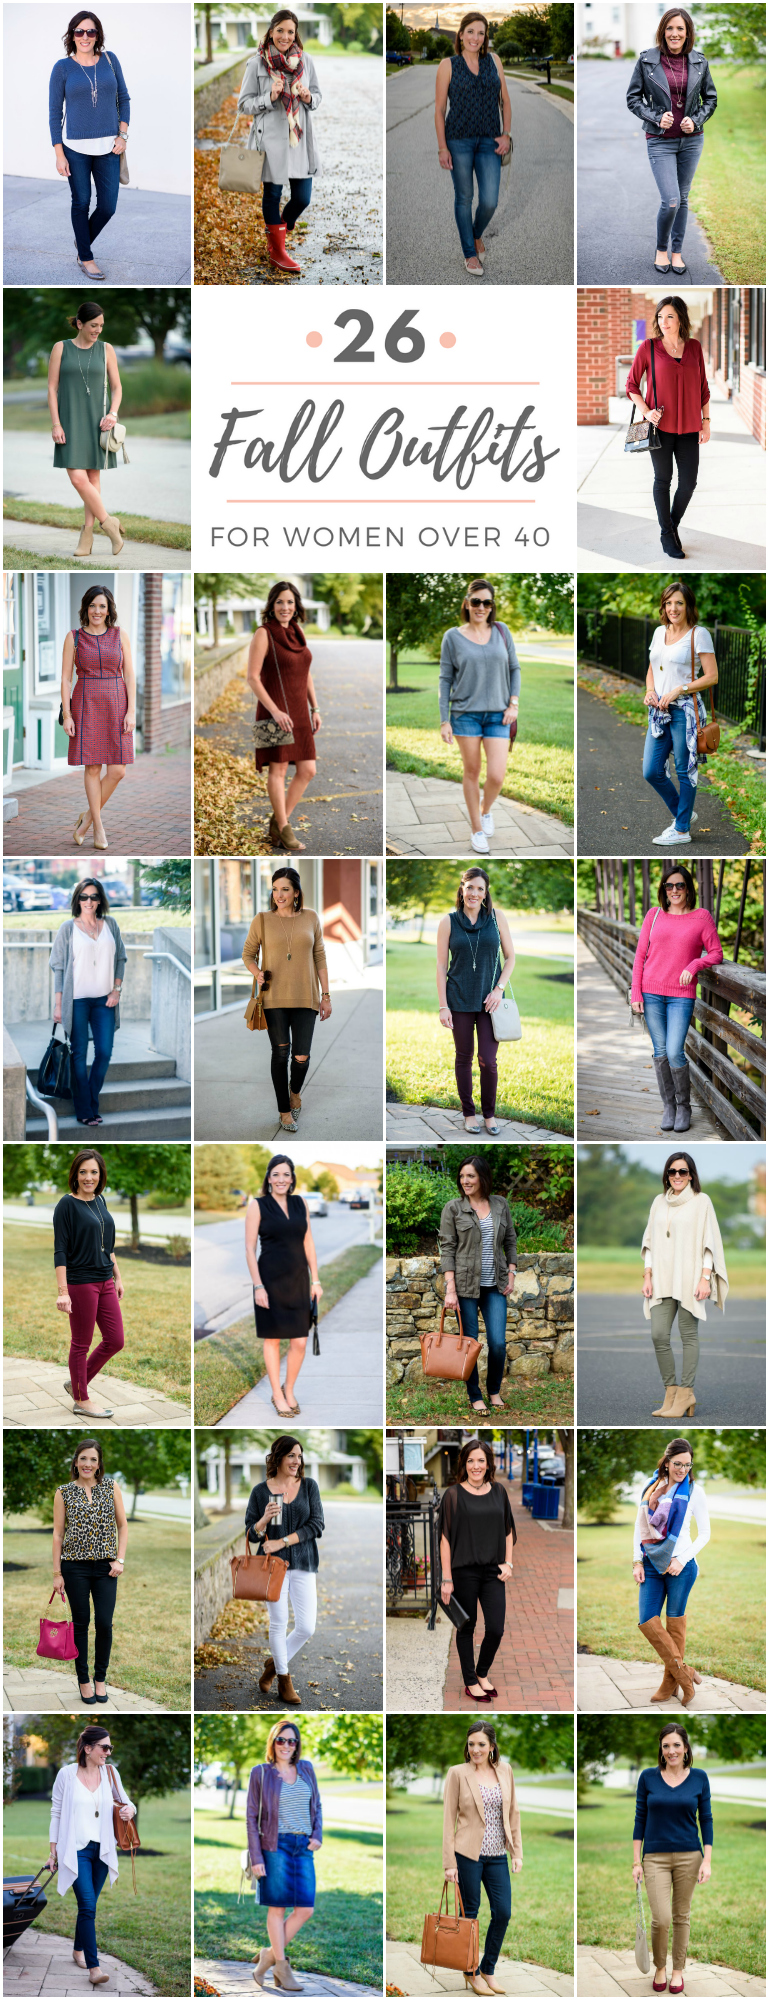 25 Fall Outfits for Women Over 40